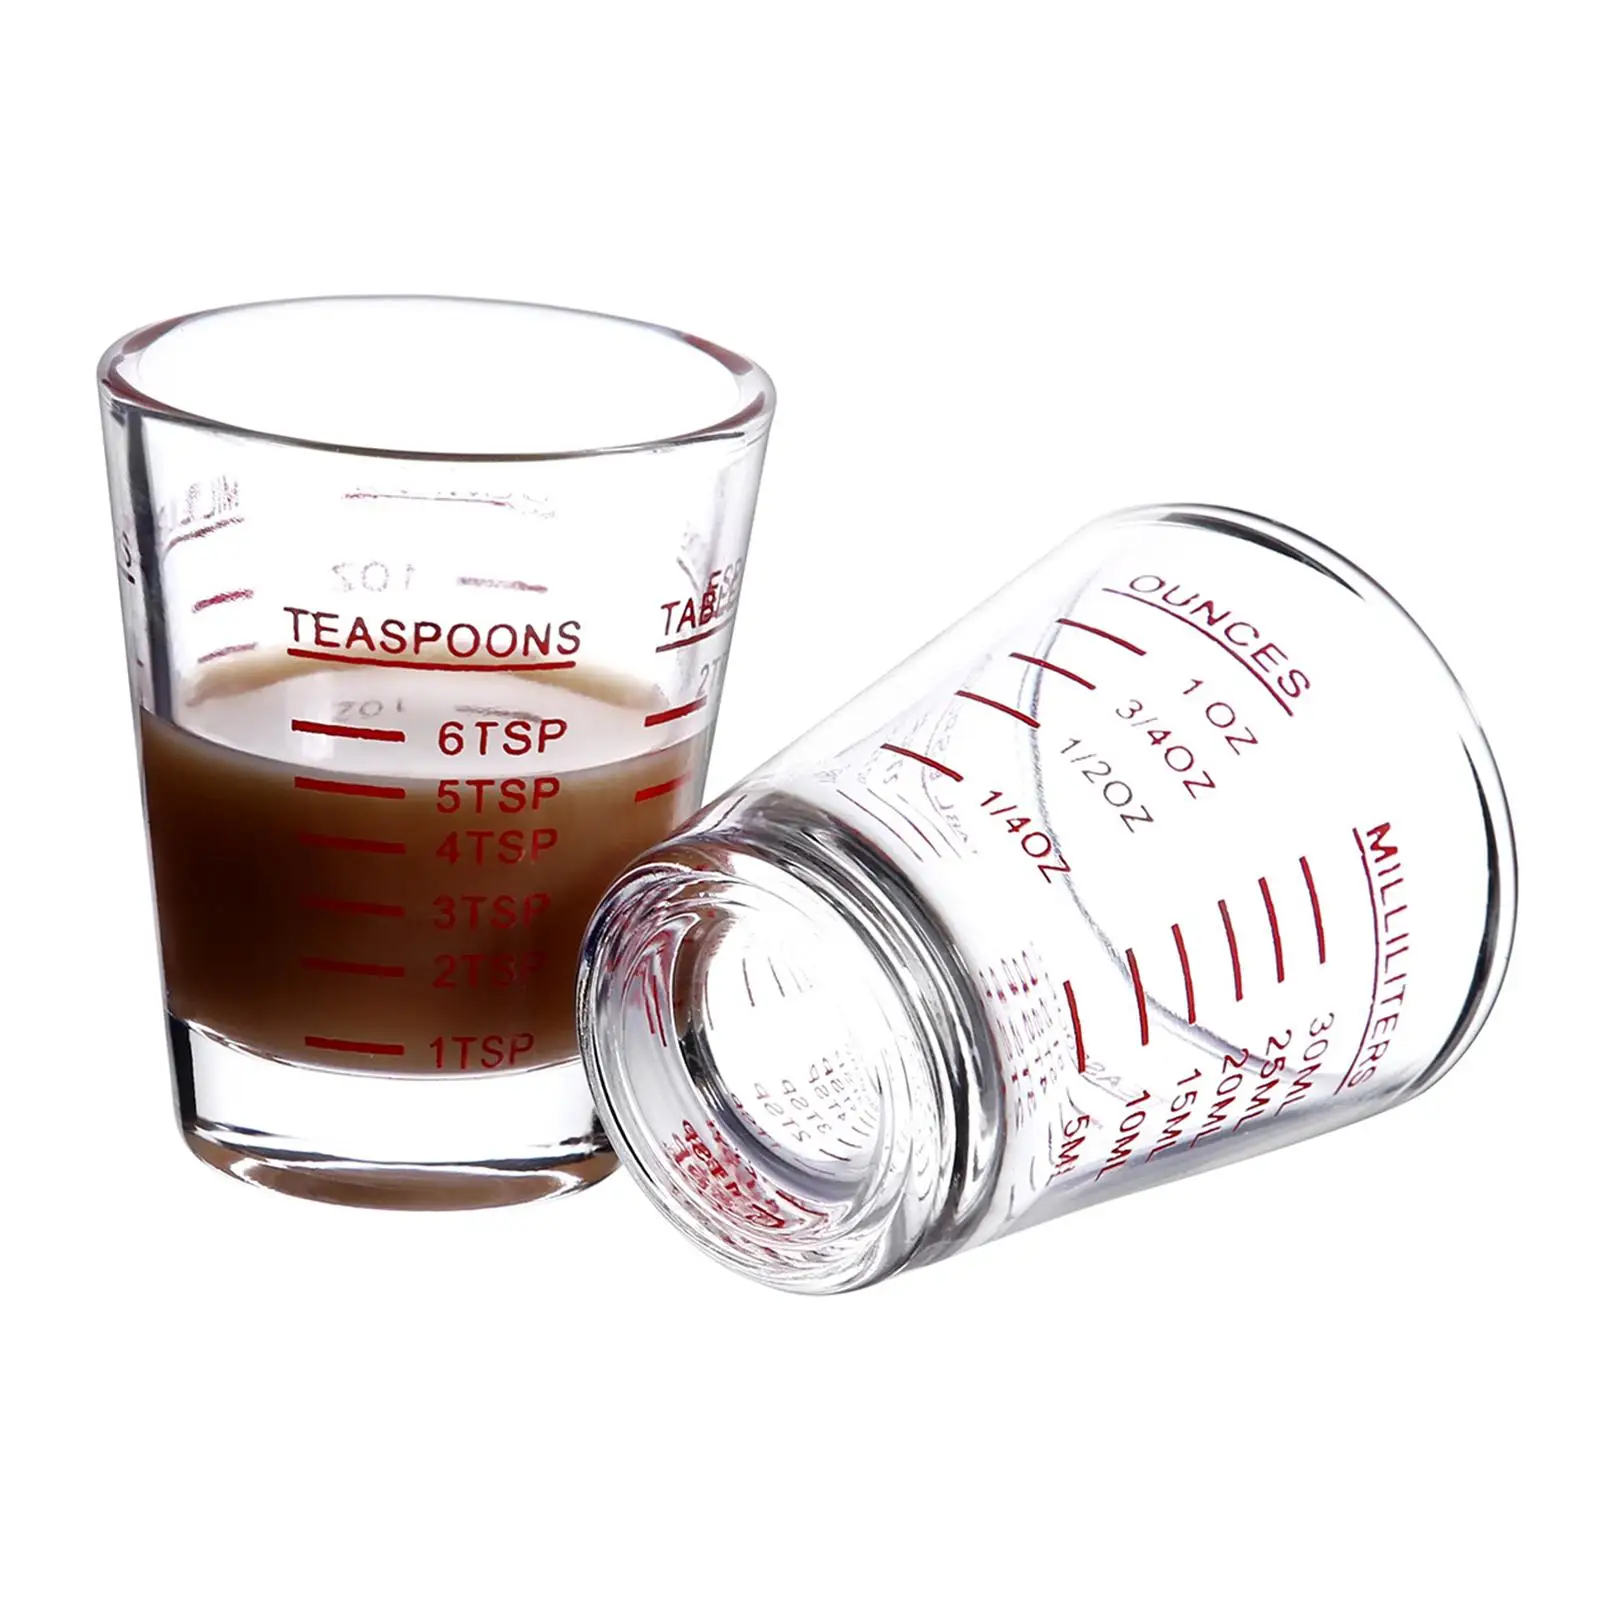 2 Pieces Shot Glasses Measuring Cup Liquid Measuring Cup Espresso Glass Cup Coffee Measuring Cup Glass Measuring Cup for Kitchen